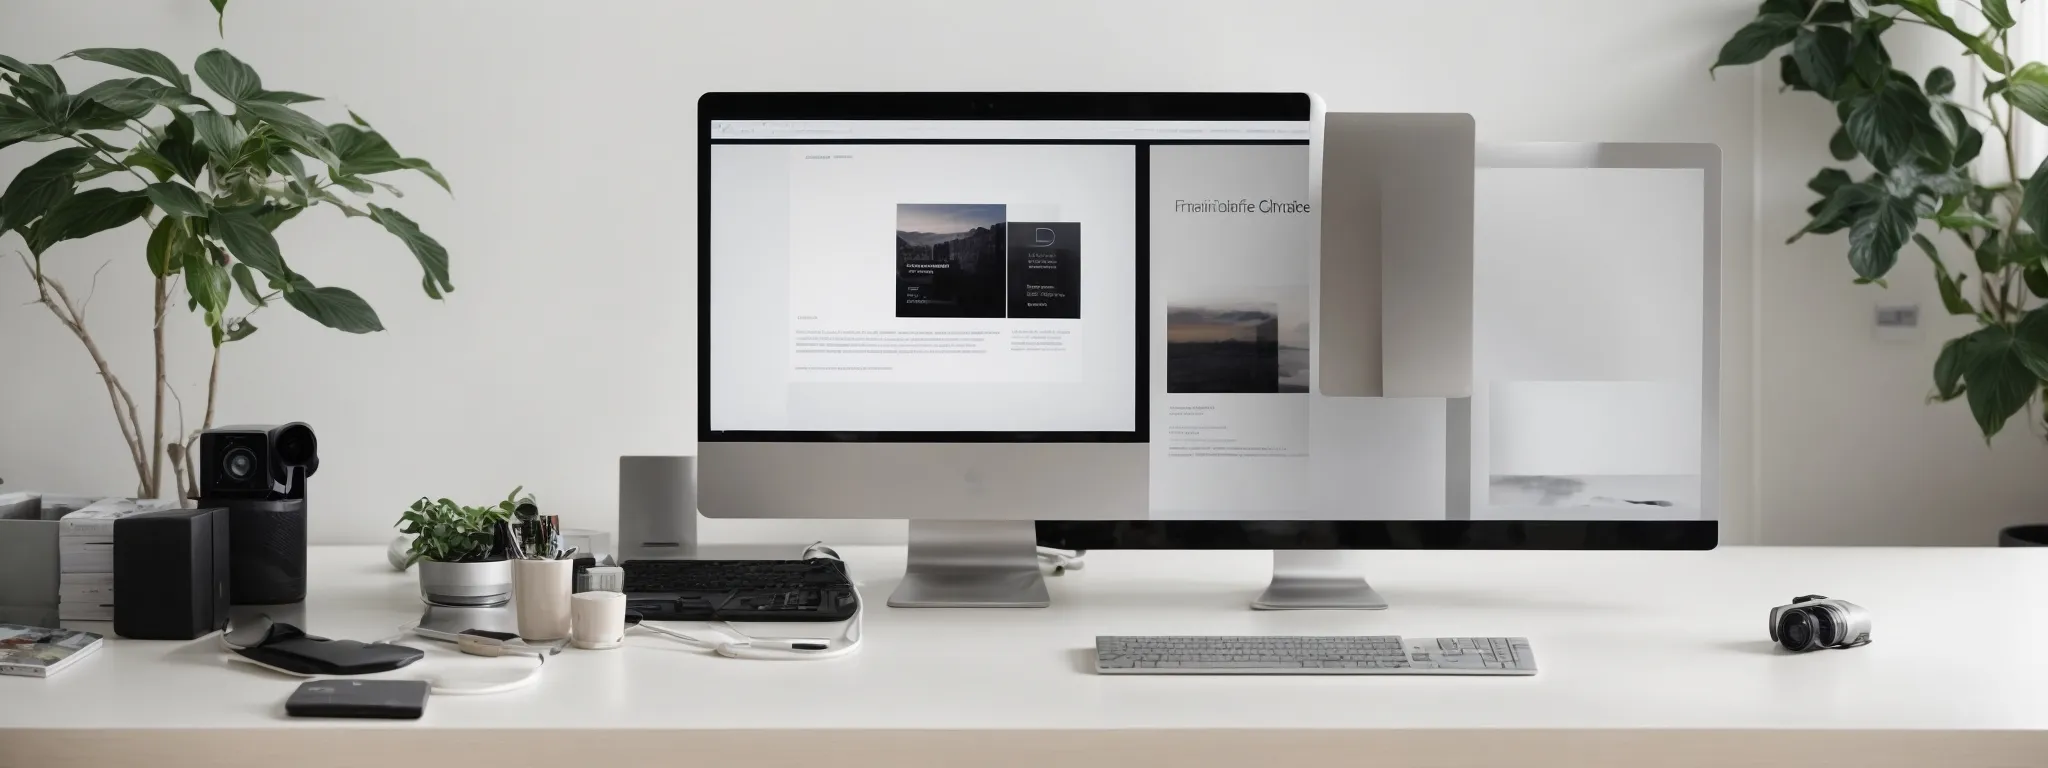 a minimalist workspace with a sleek, modern computer displaying a clean and uncluttered web page design.